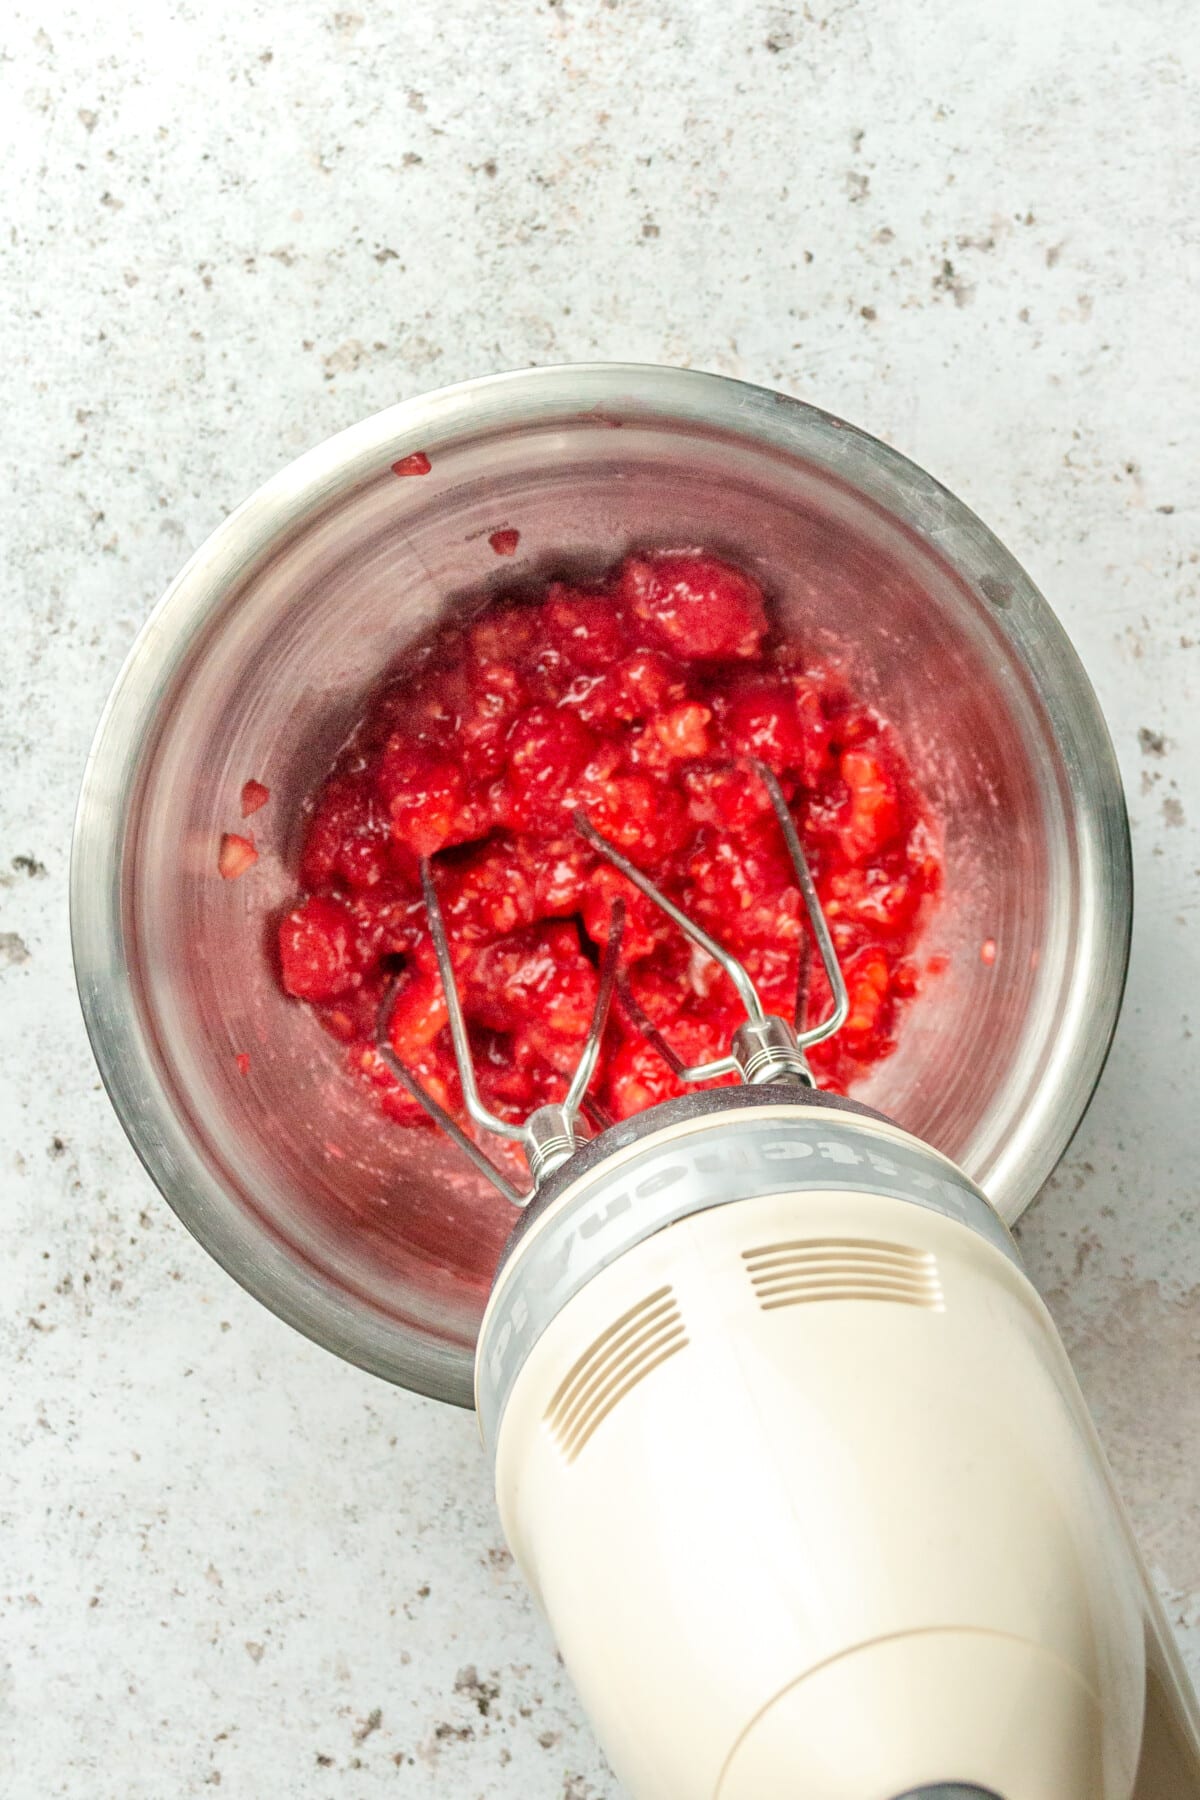 Fresh raspberries are whipped with a beater in a stainless steel bowl until muddled on a light grey colored surface.